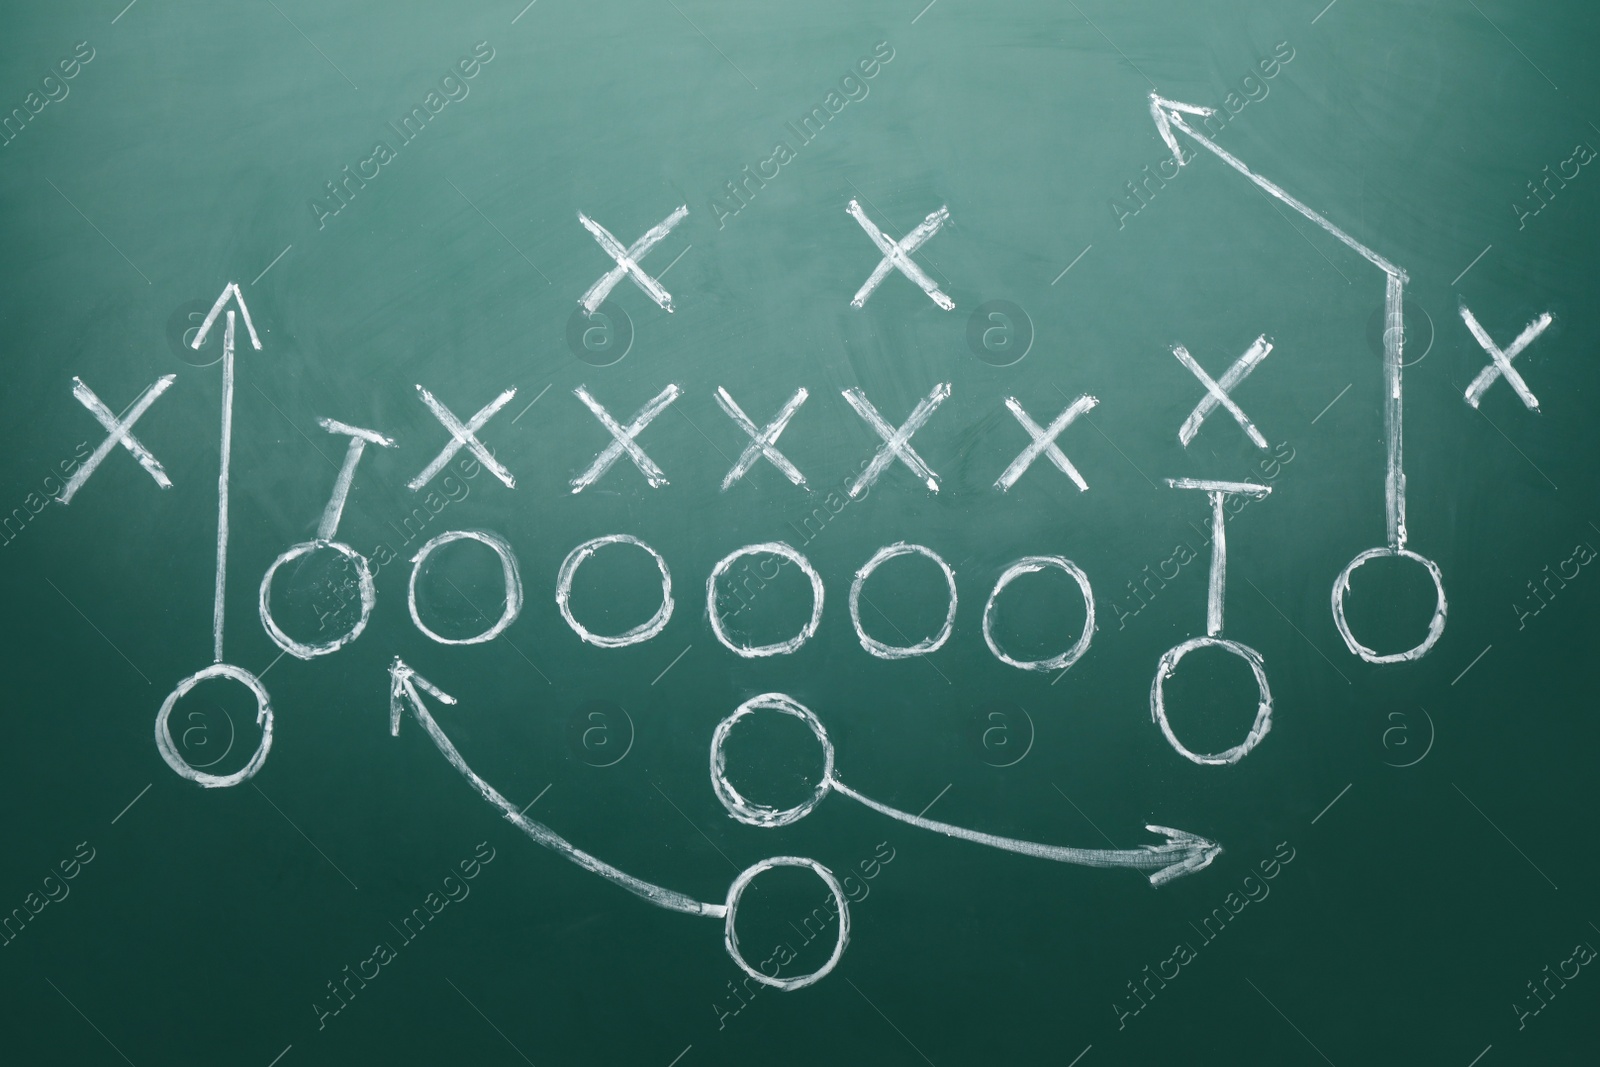 Photo of Football game strategy drawn on green chalkboard